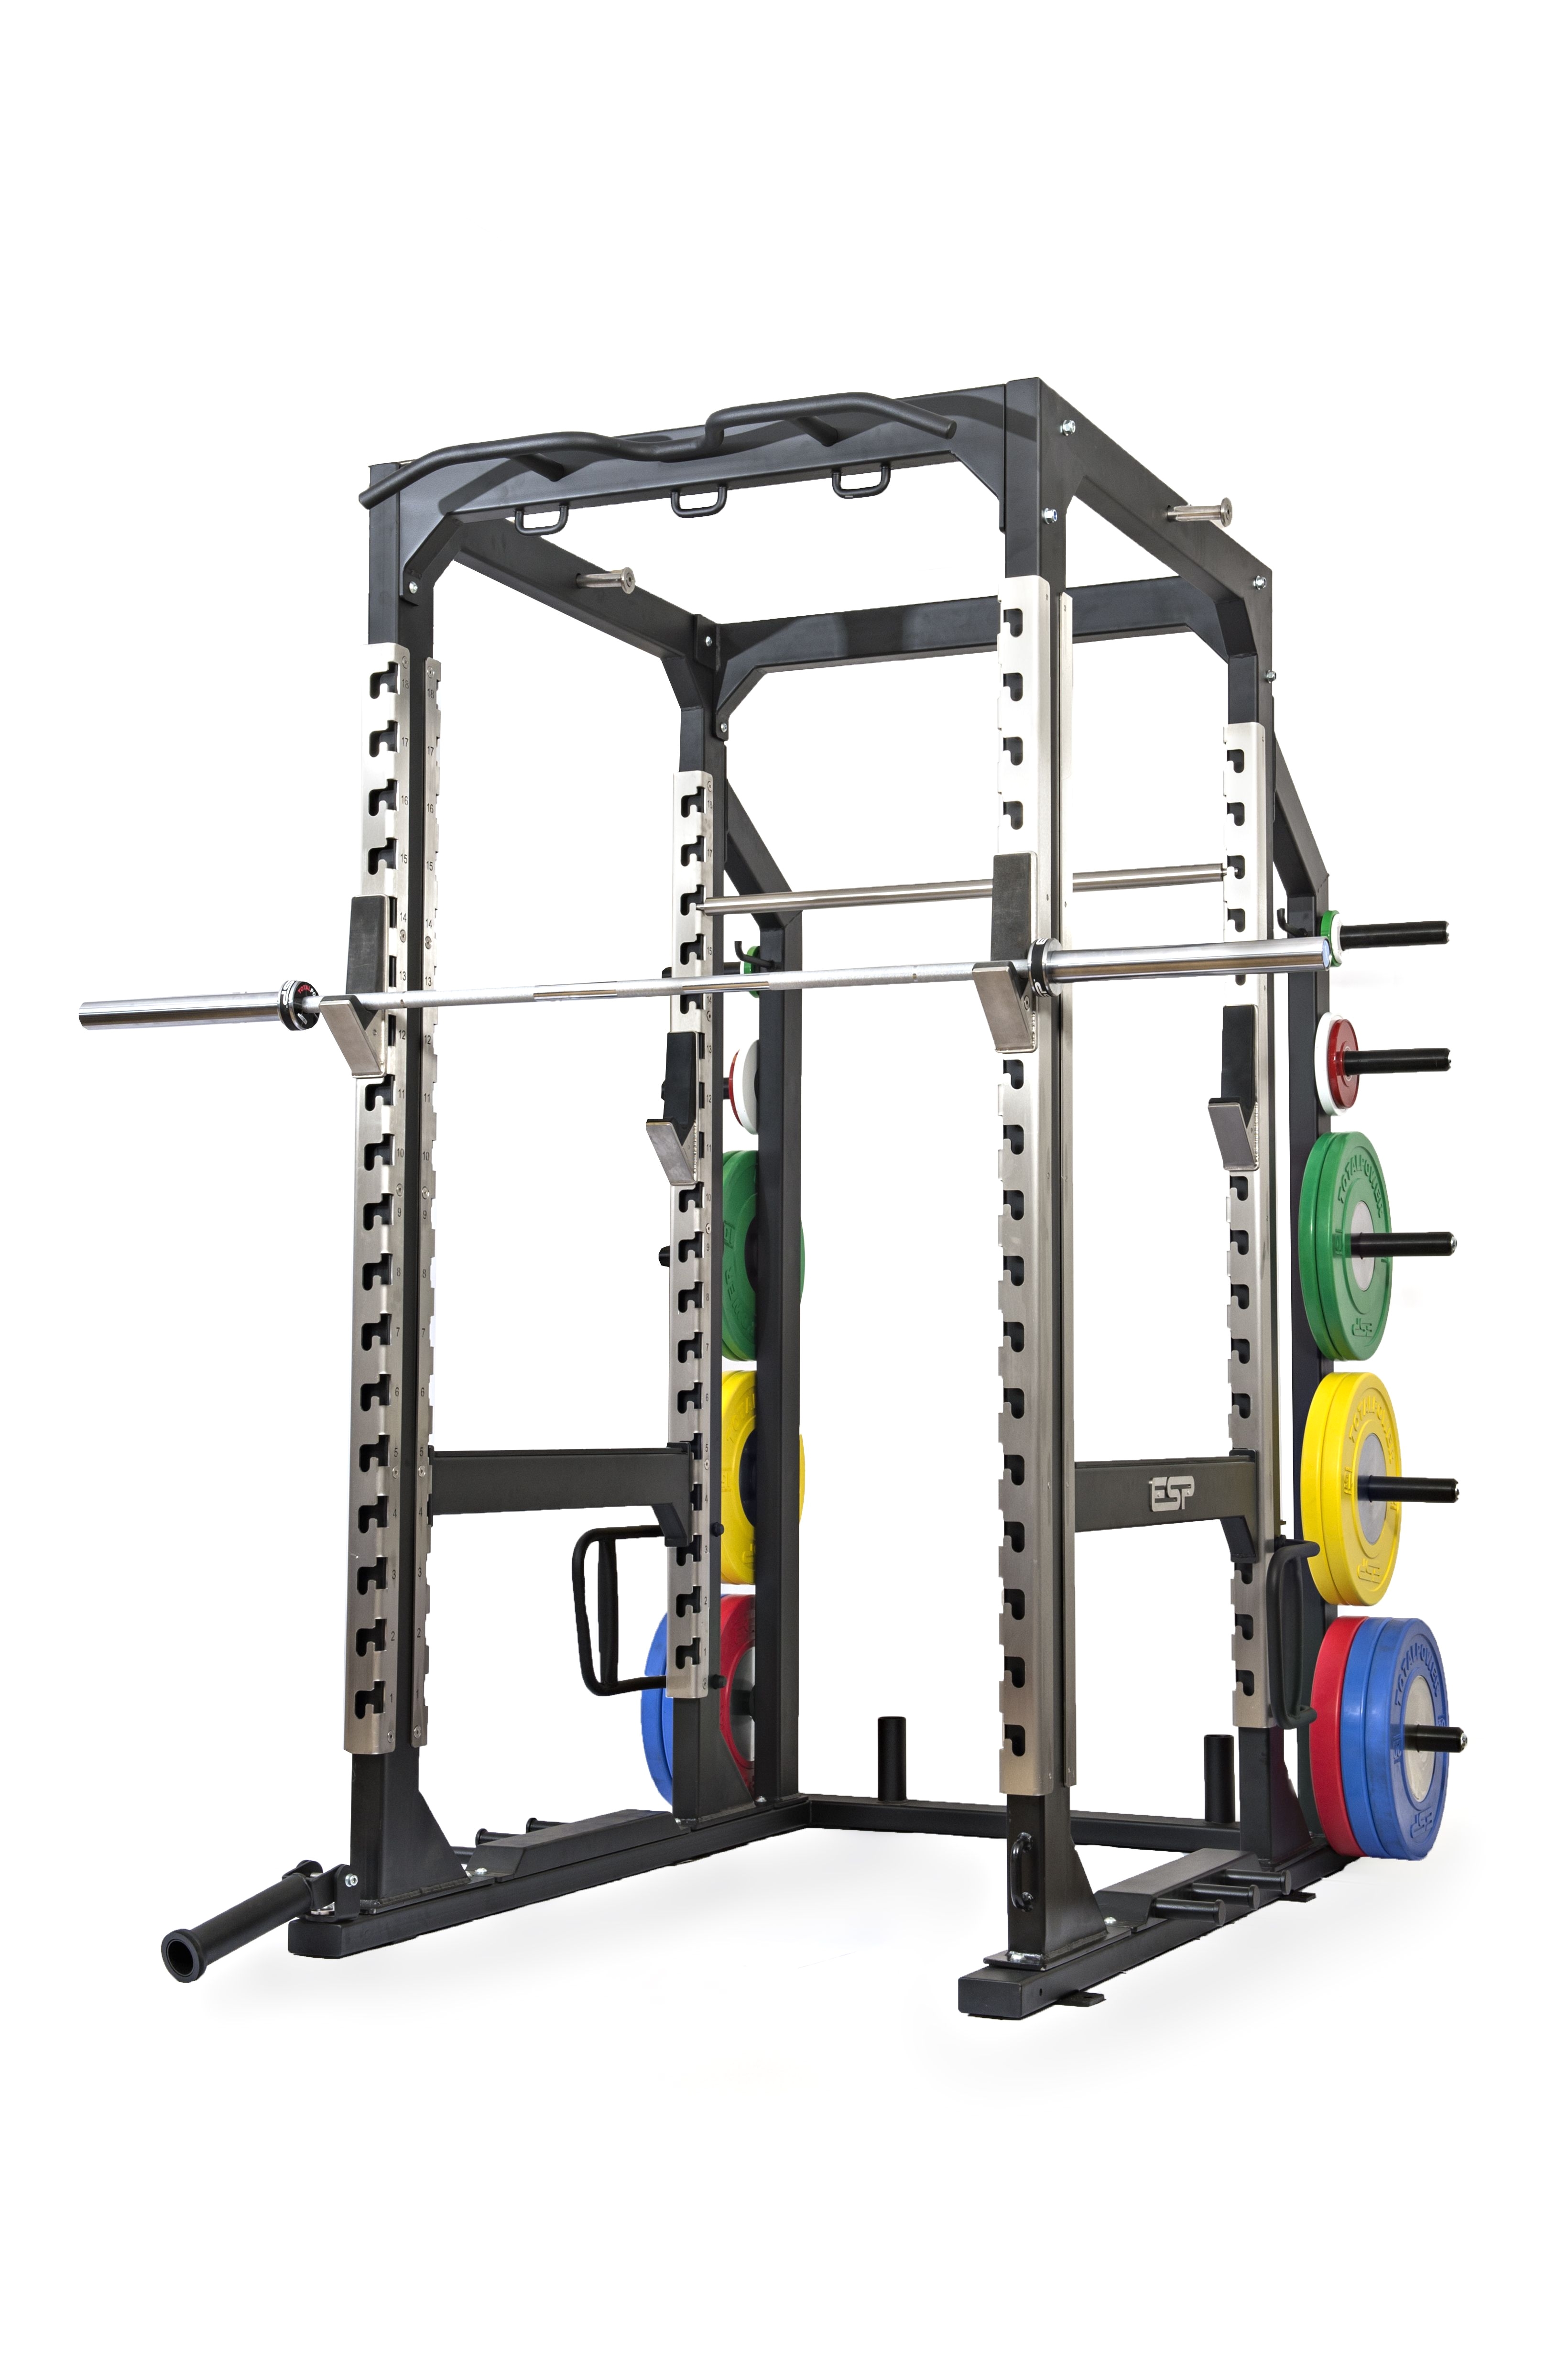 esp fitness pro power rack with integrated accessories the pro power rack provides unrivalled functionality robustness and aesthetics